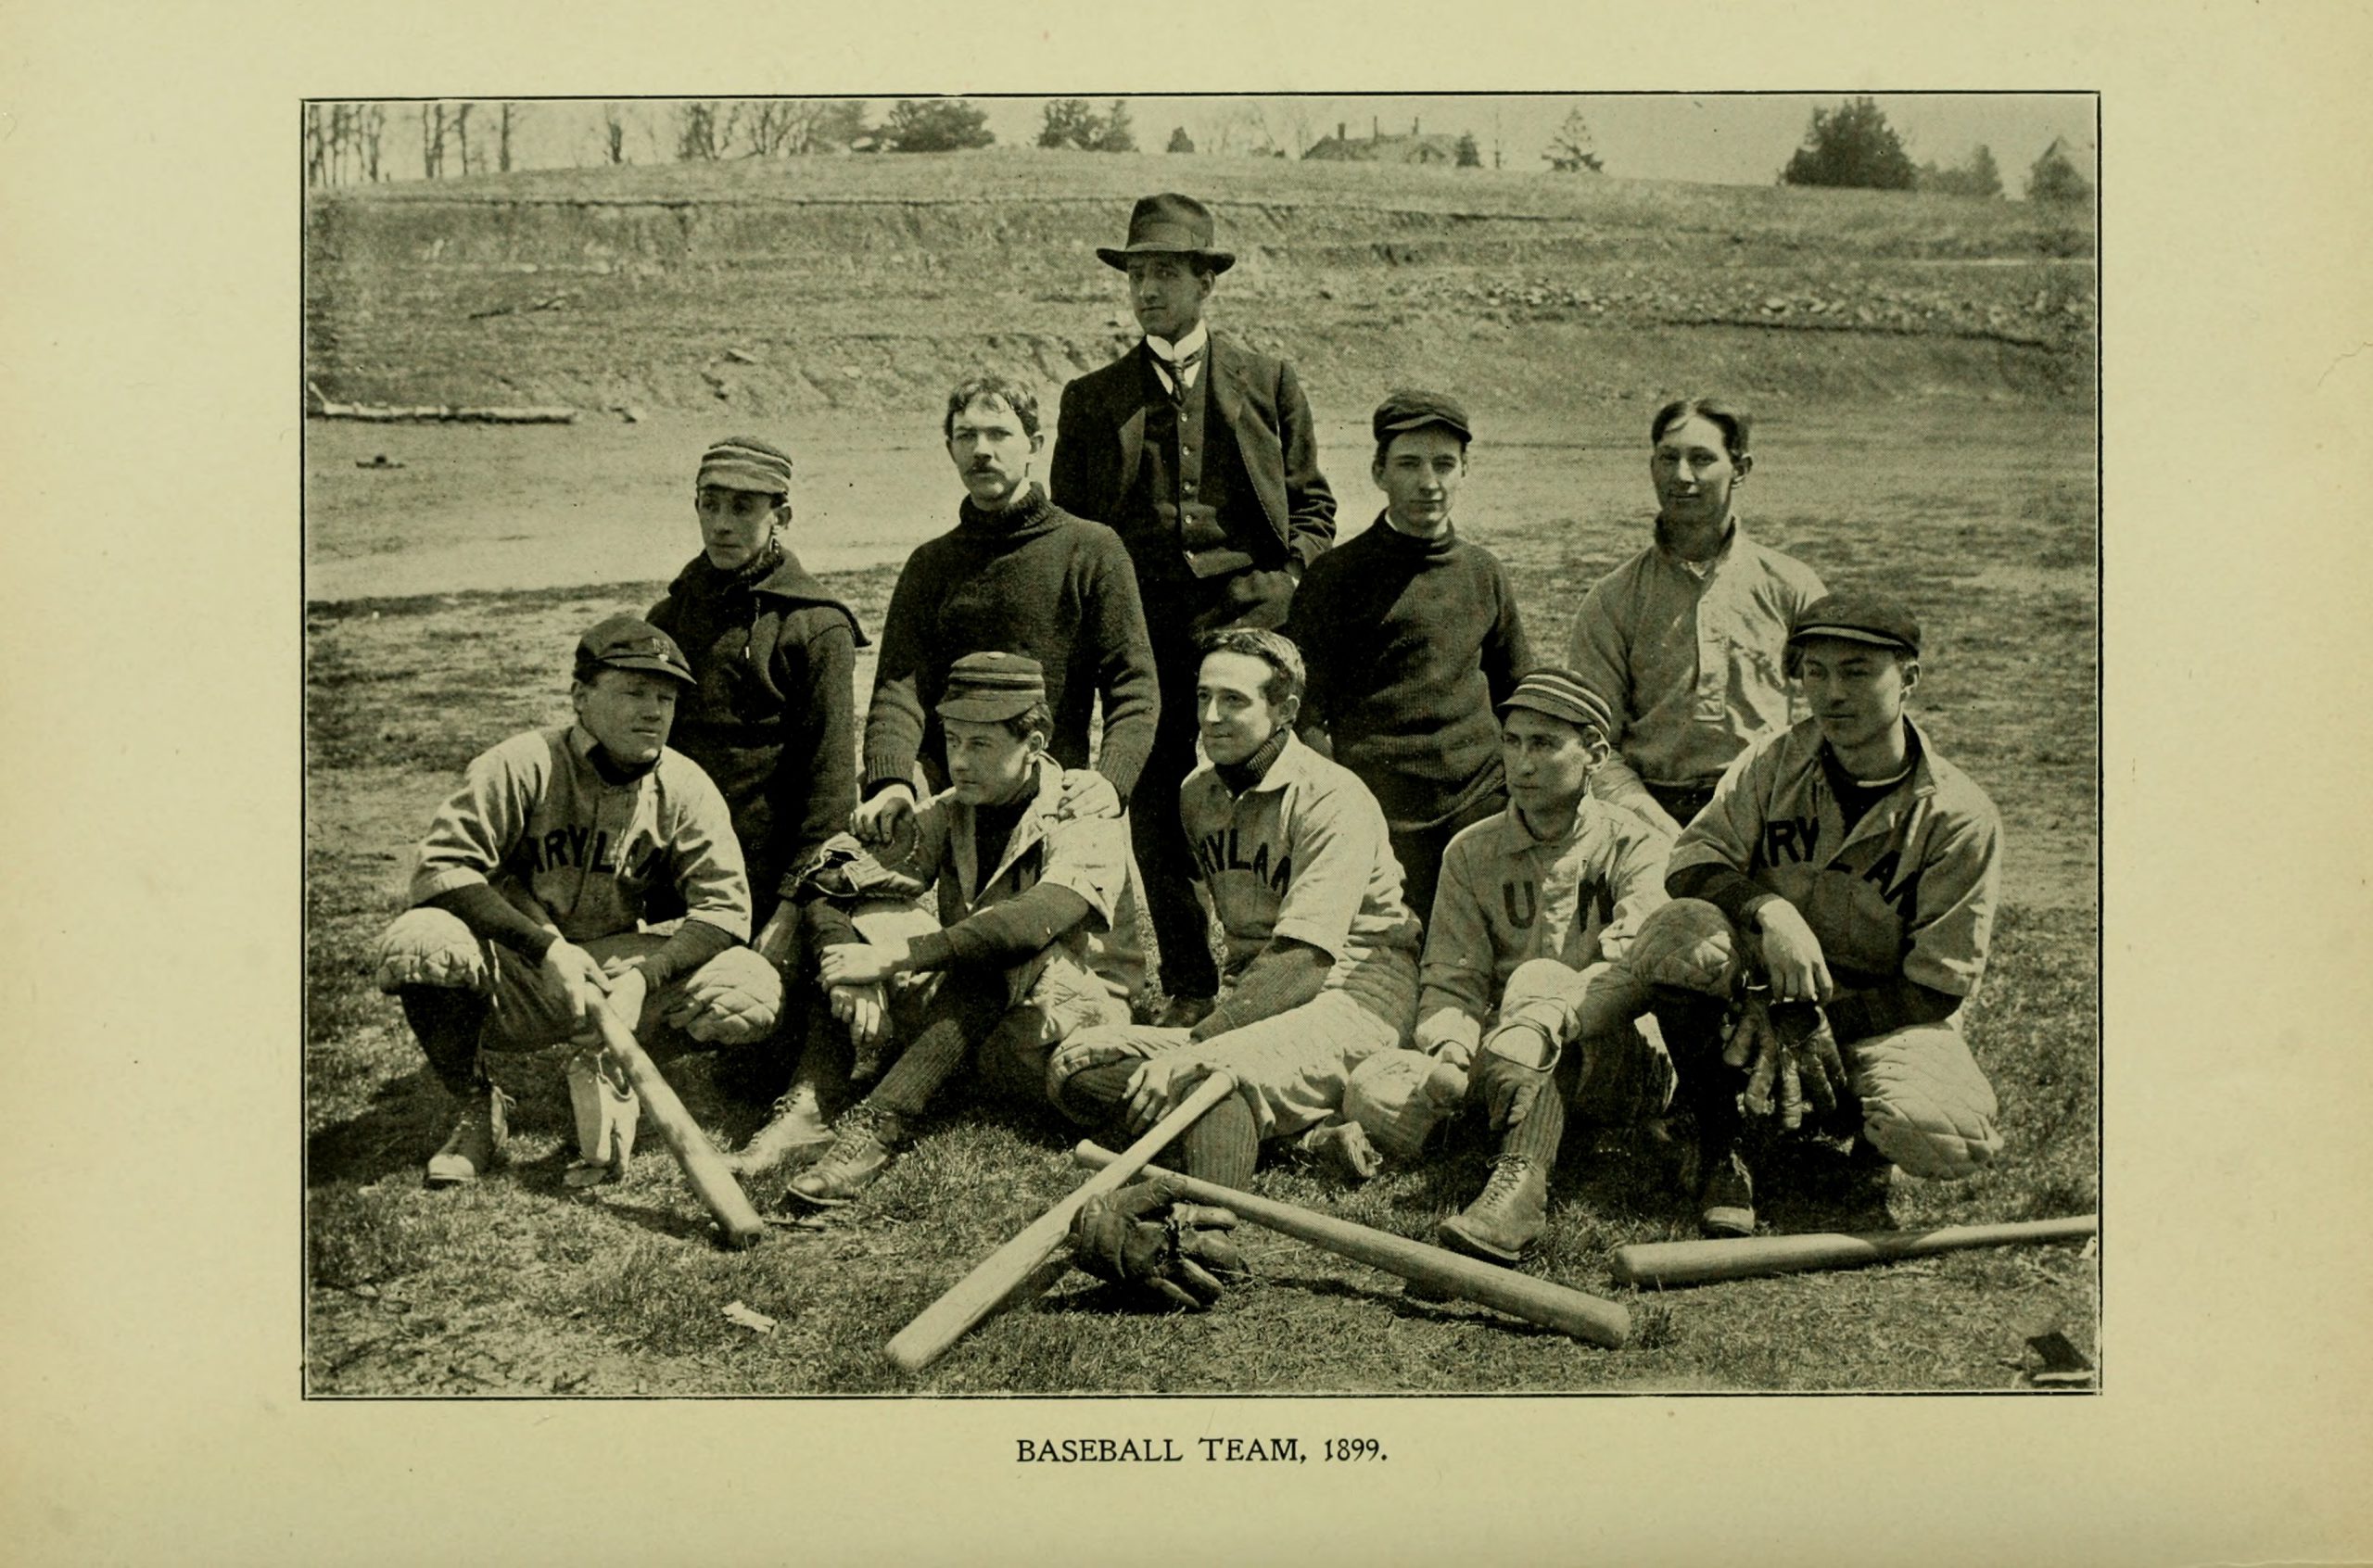 Photograph of 10 men from the 1899 baseball team.